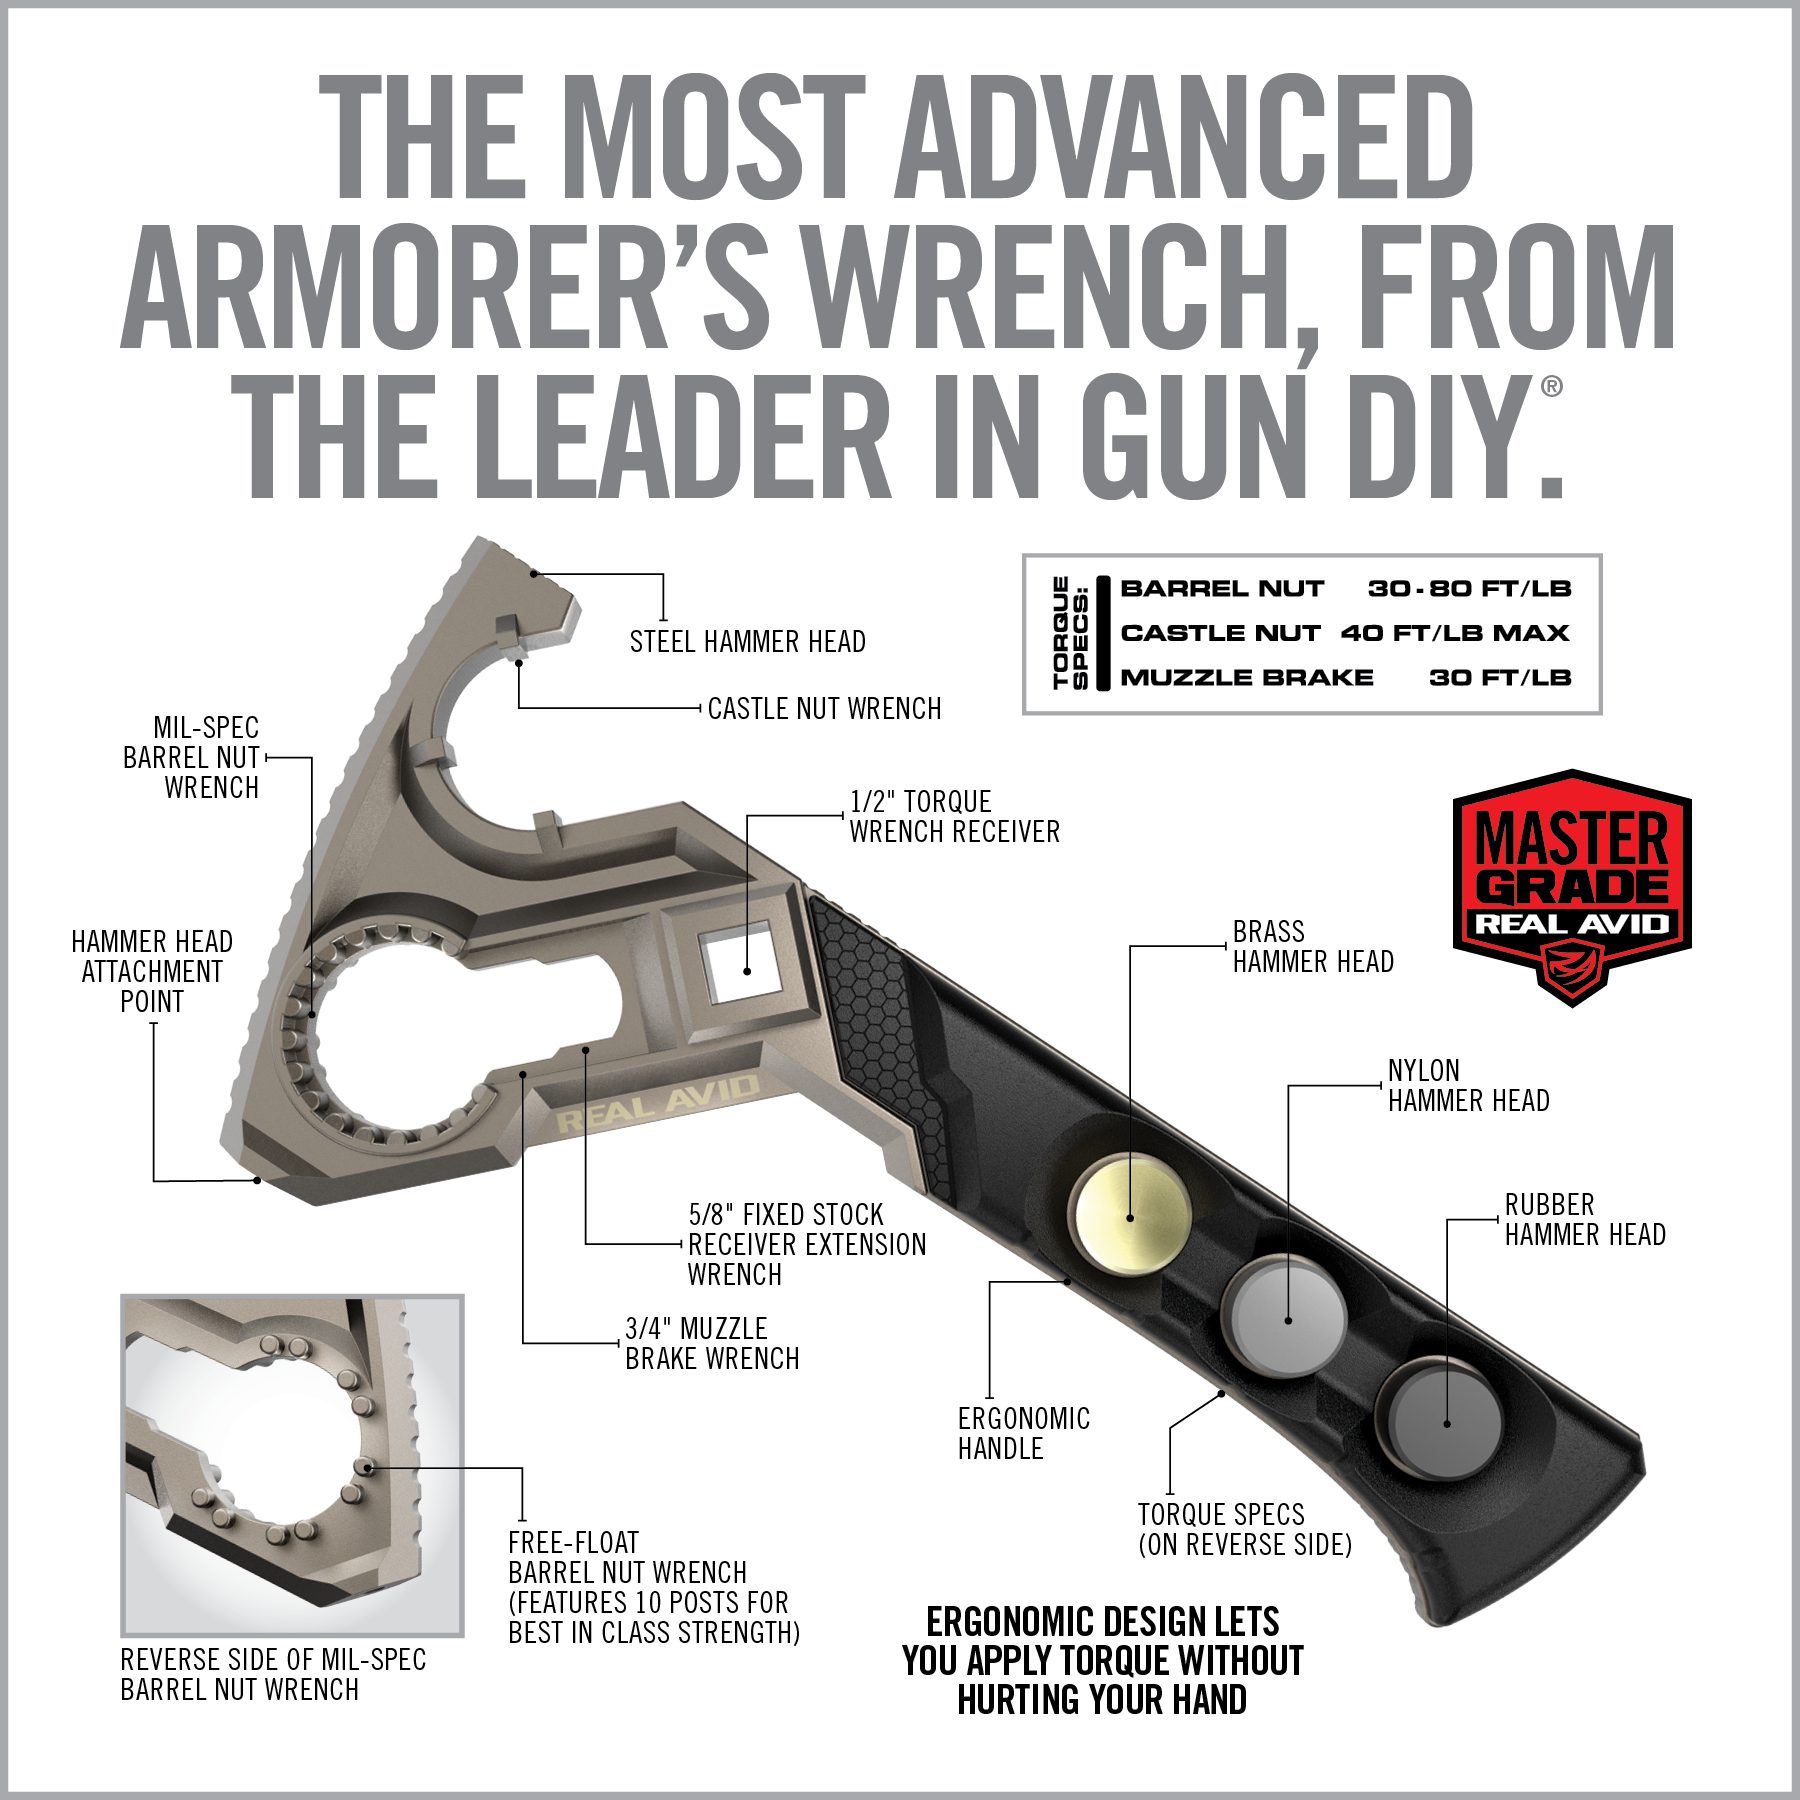 the most advanced armorer's wrench, from the leader in gun diy